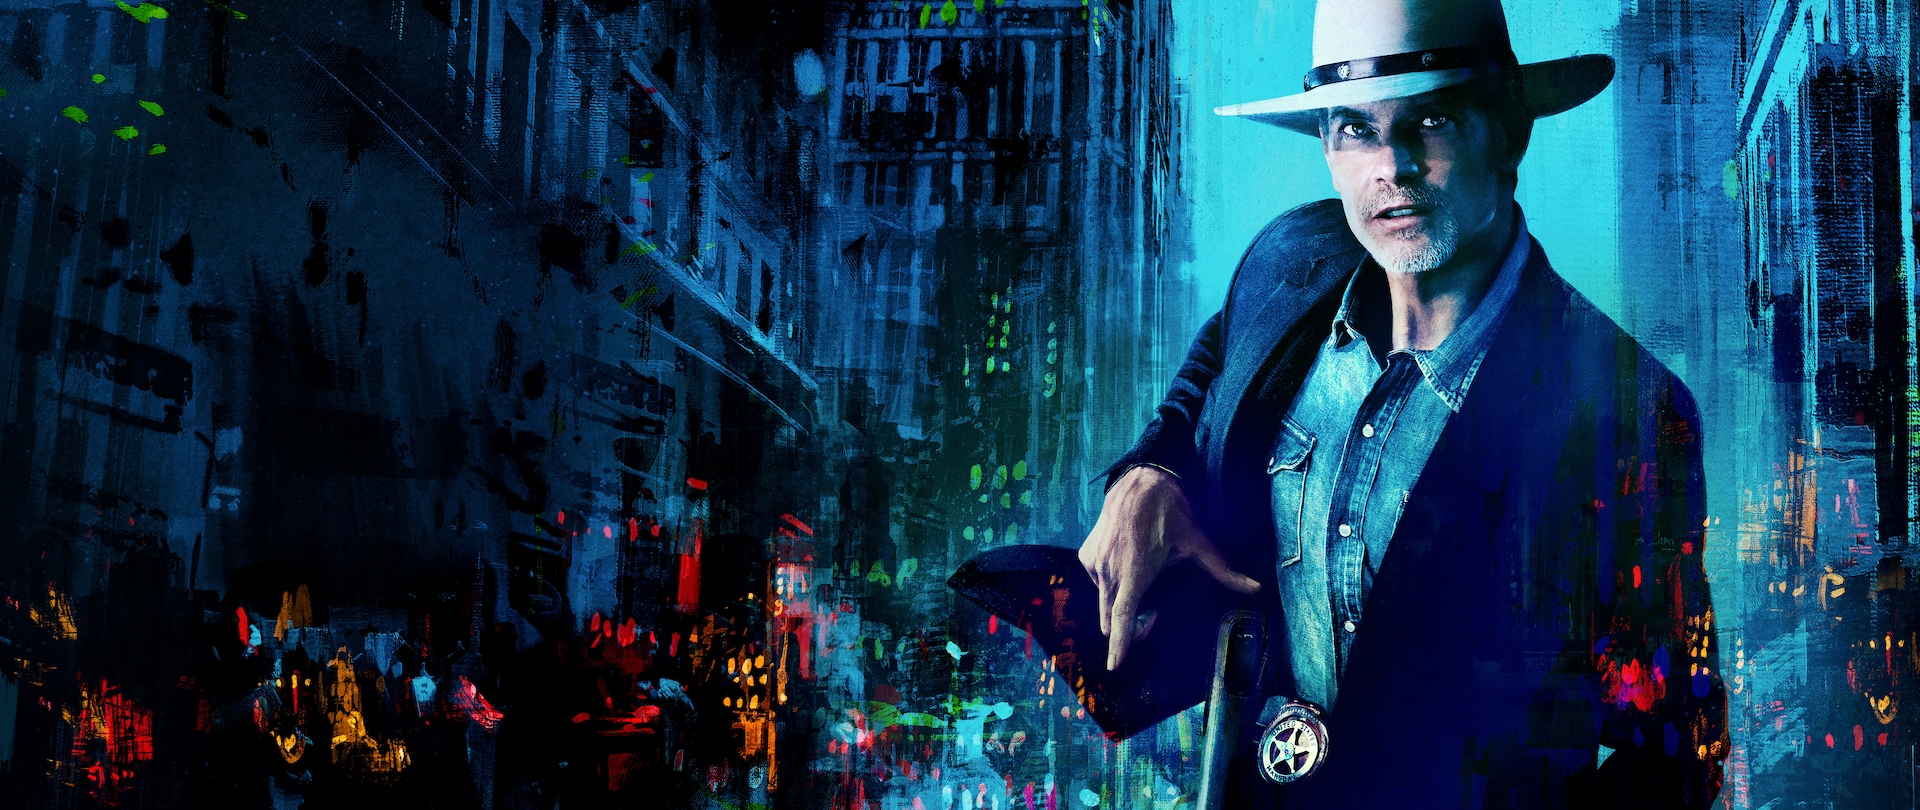 U.S. Marshal Raylan Givens in a white cowboy hat and blue denim outfit with a watercolor cityscape background.